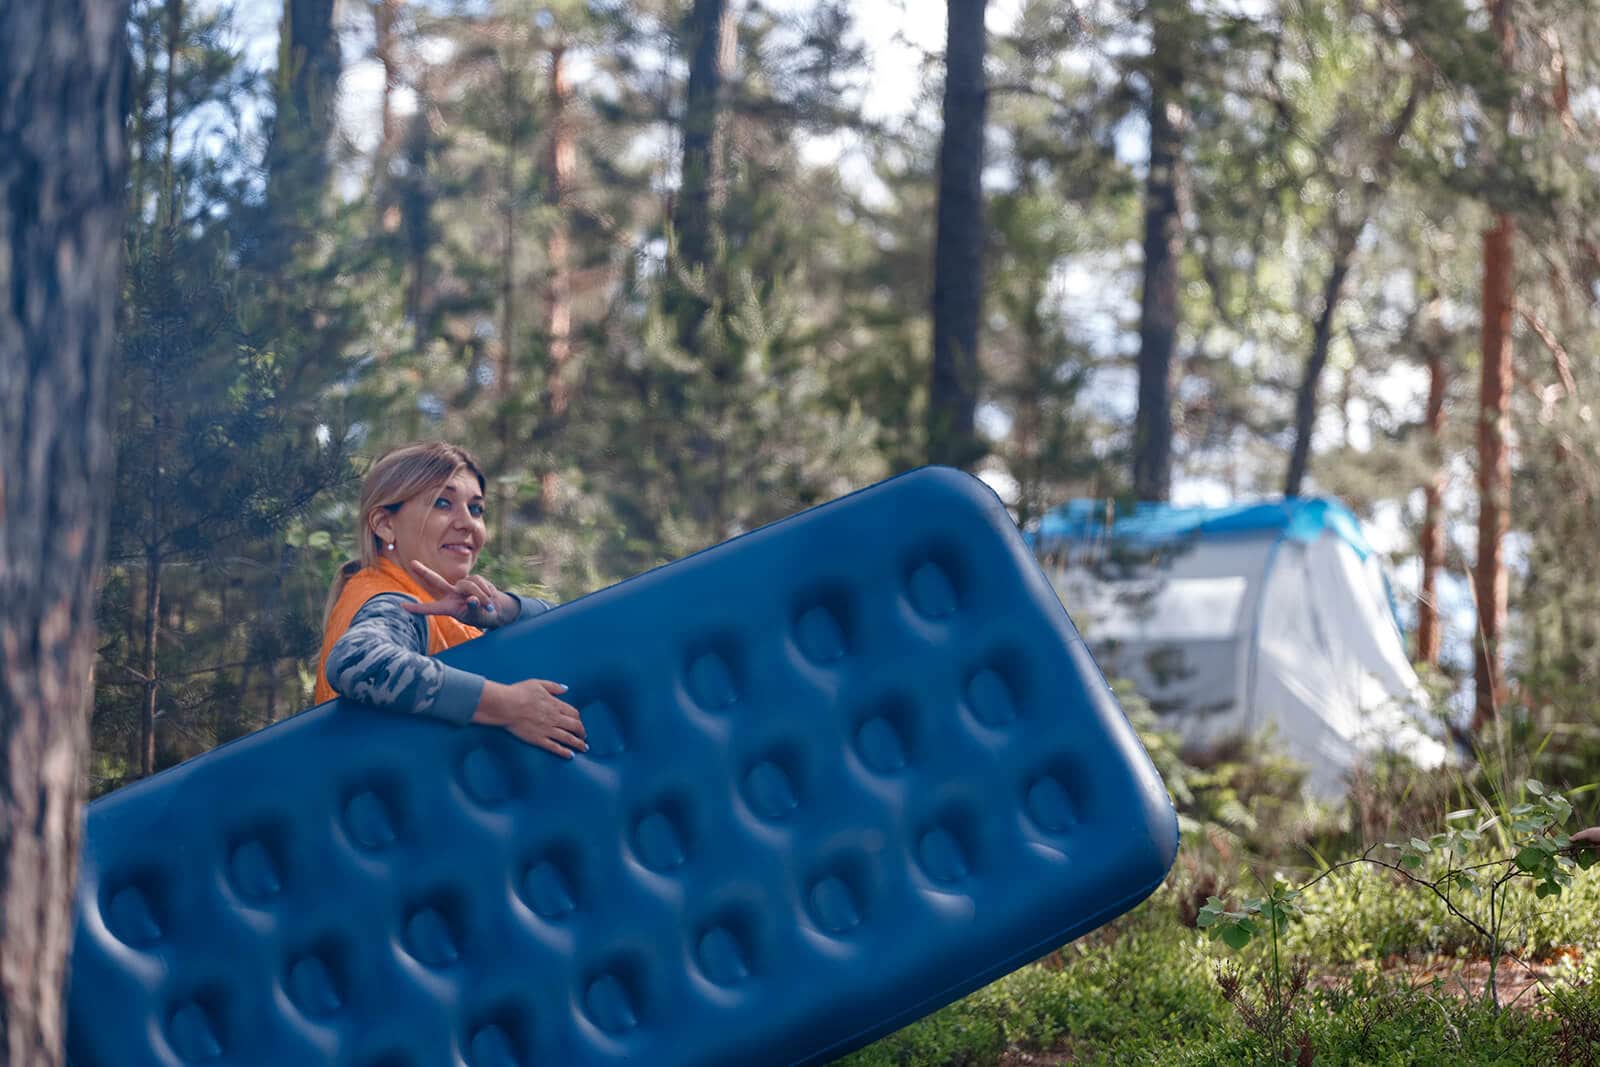 Camper carries blue air mattress fully pumped to tent out in the wilderness